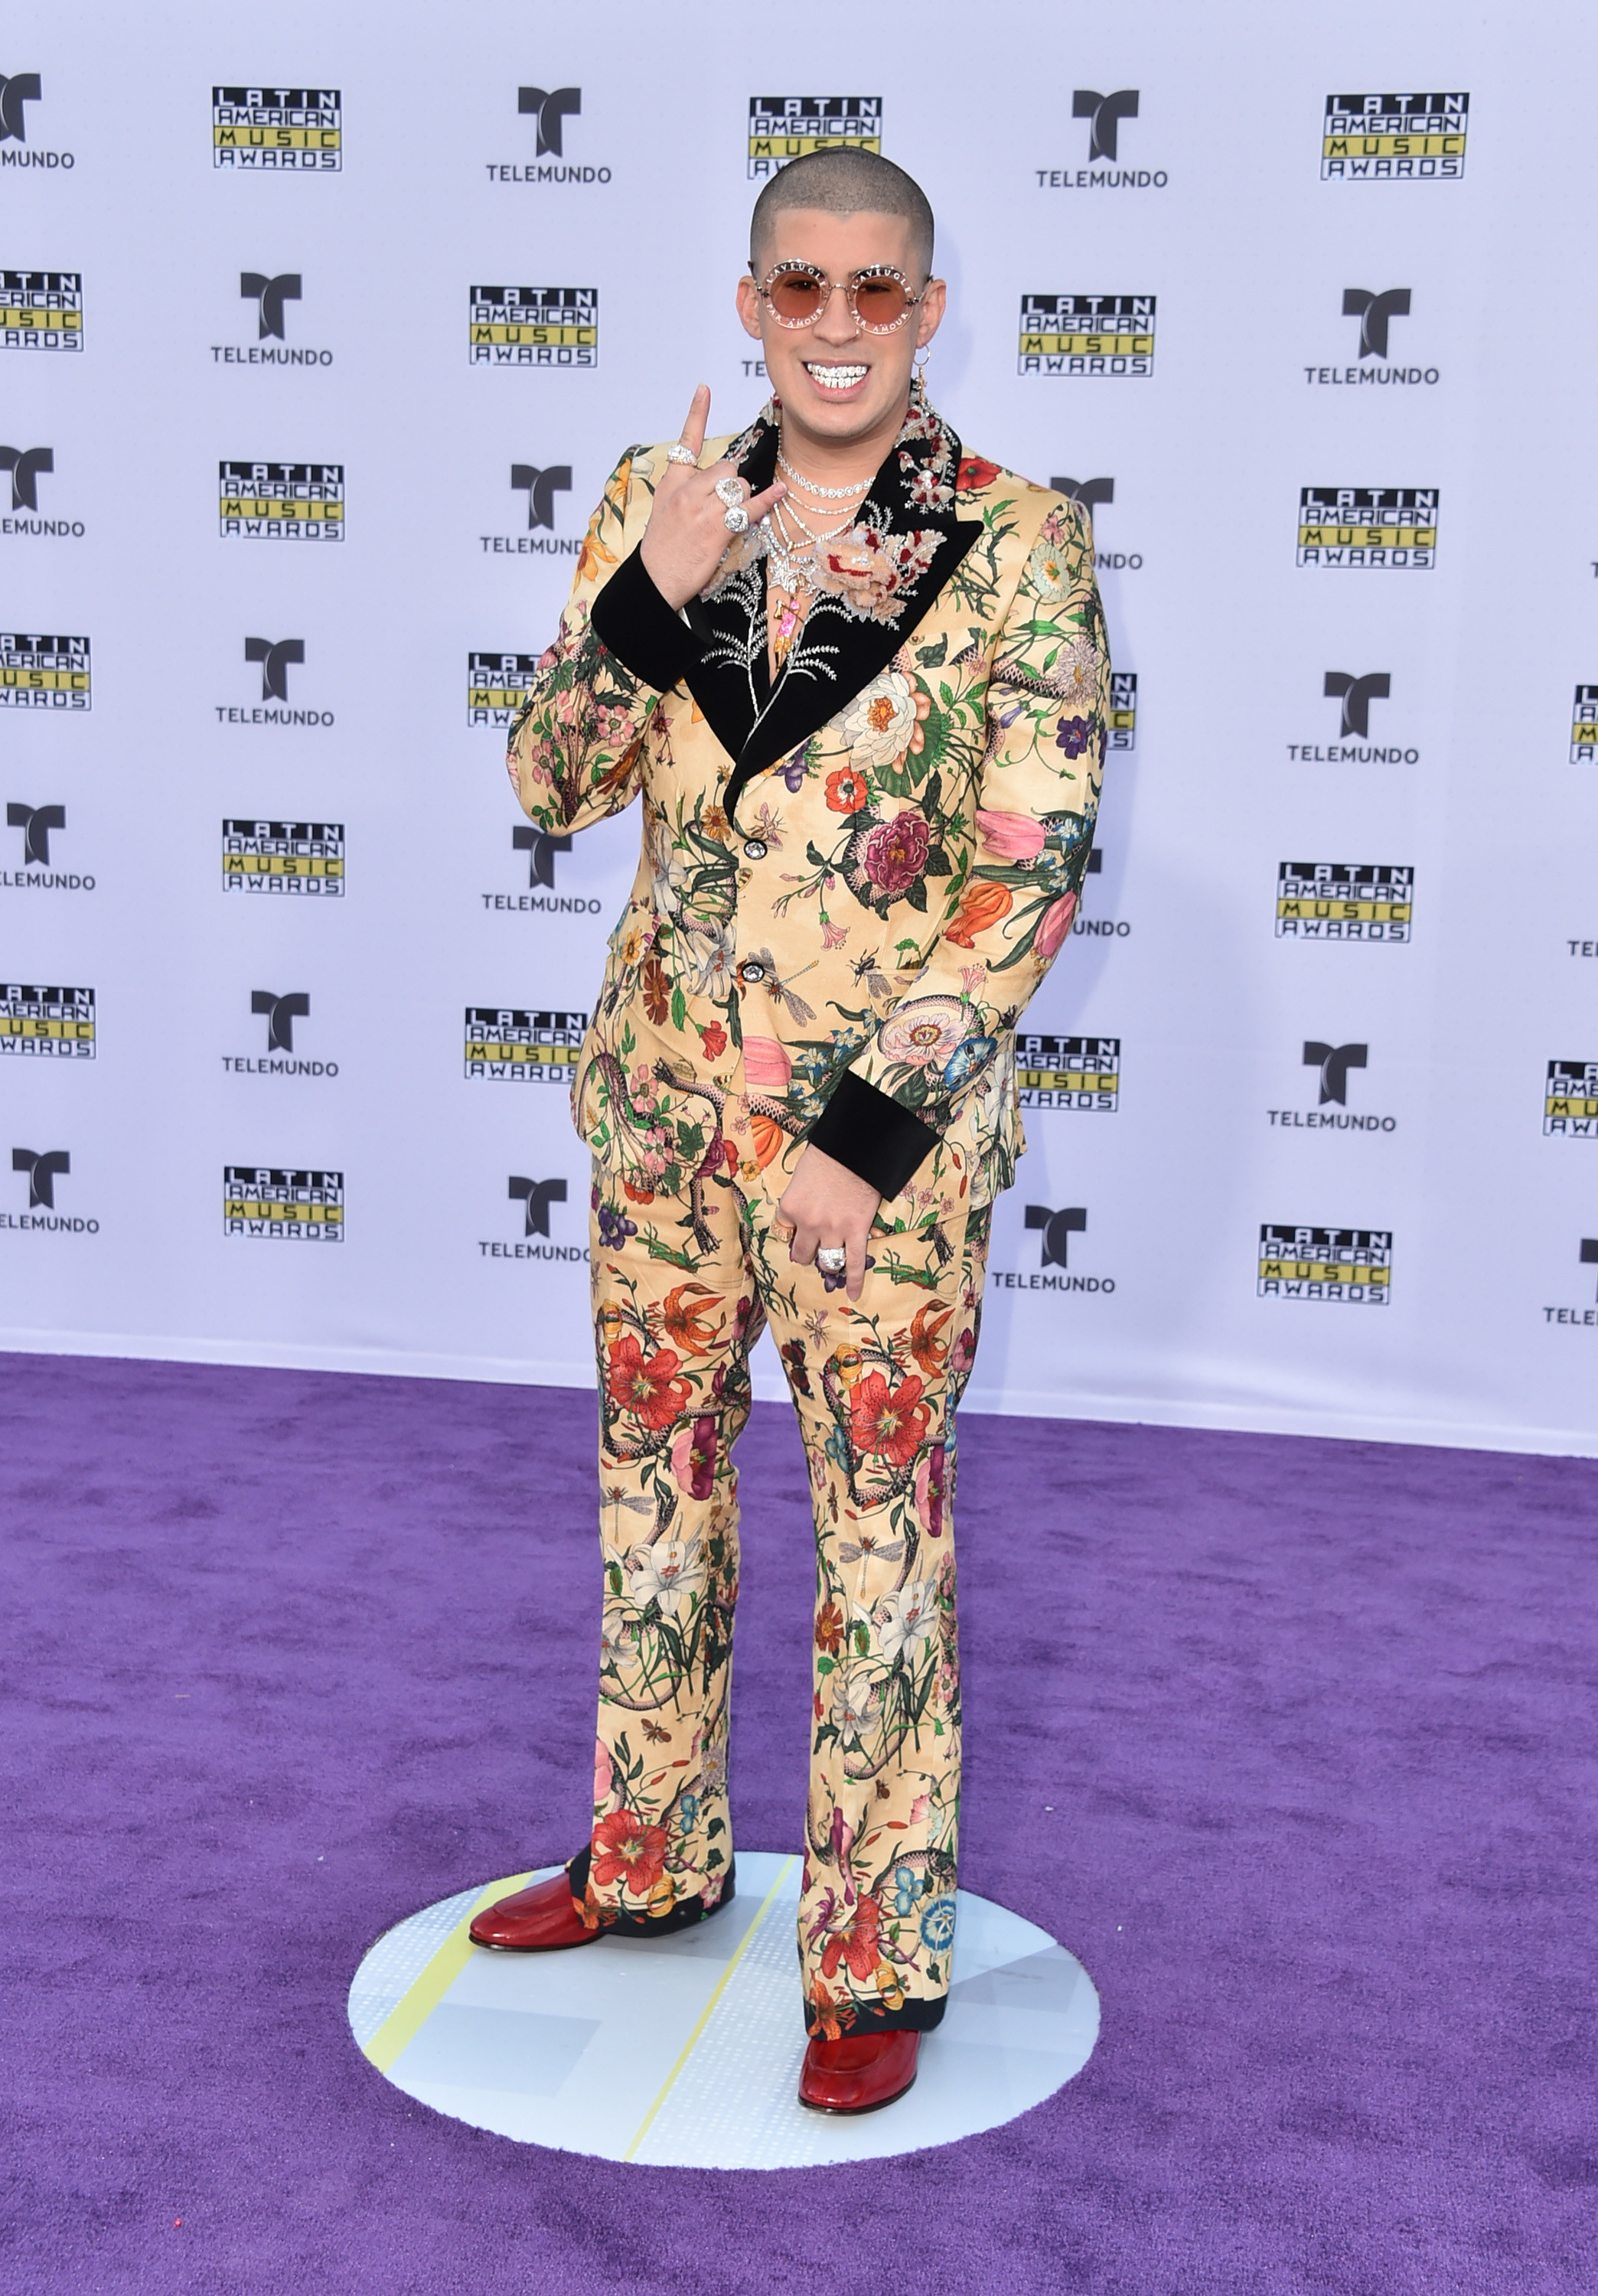 25 Of Bad Bunny's Most Iconic Fashion Looks